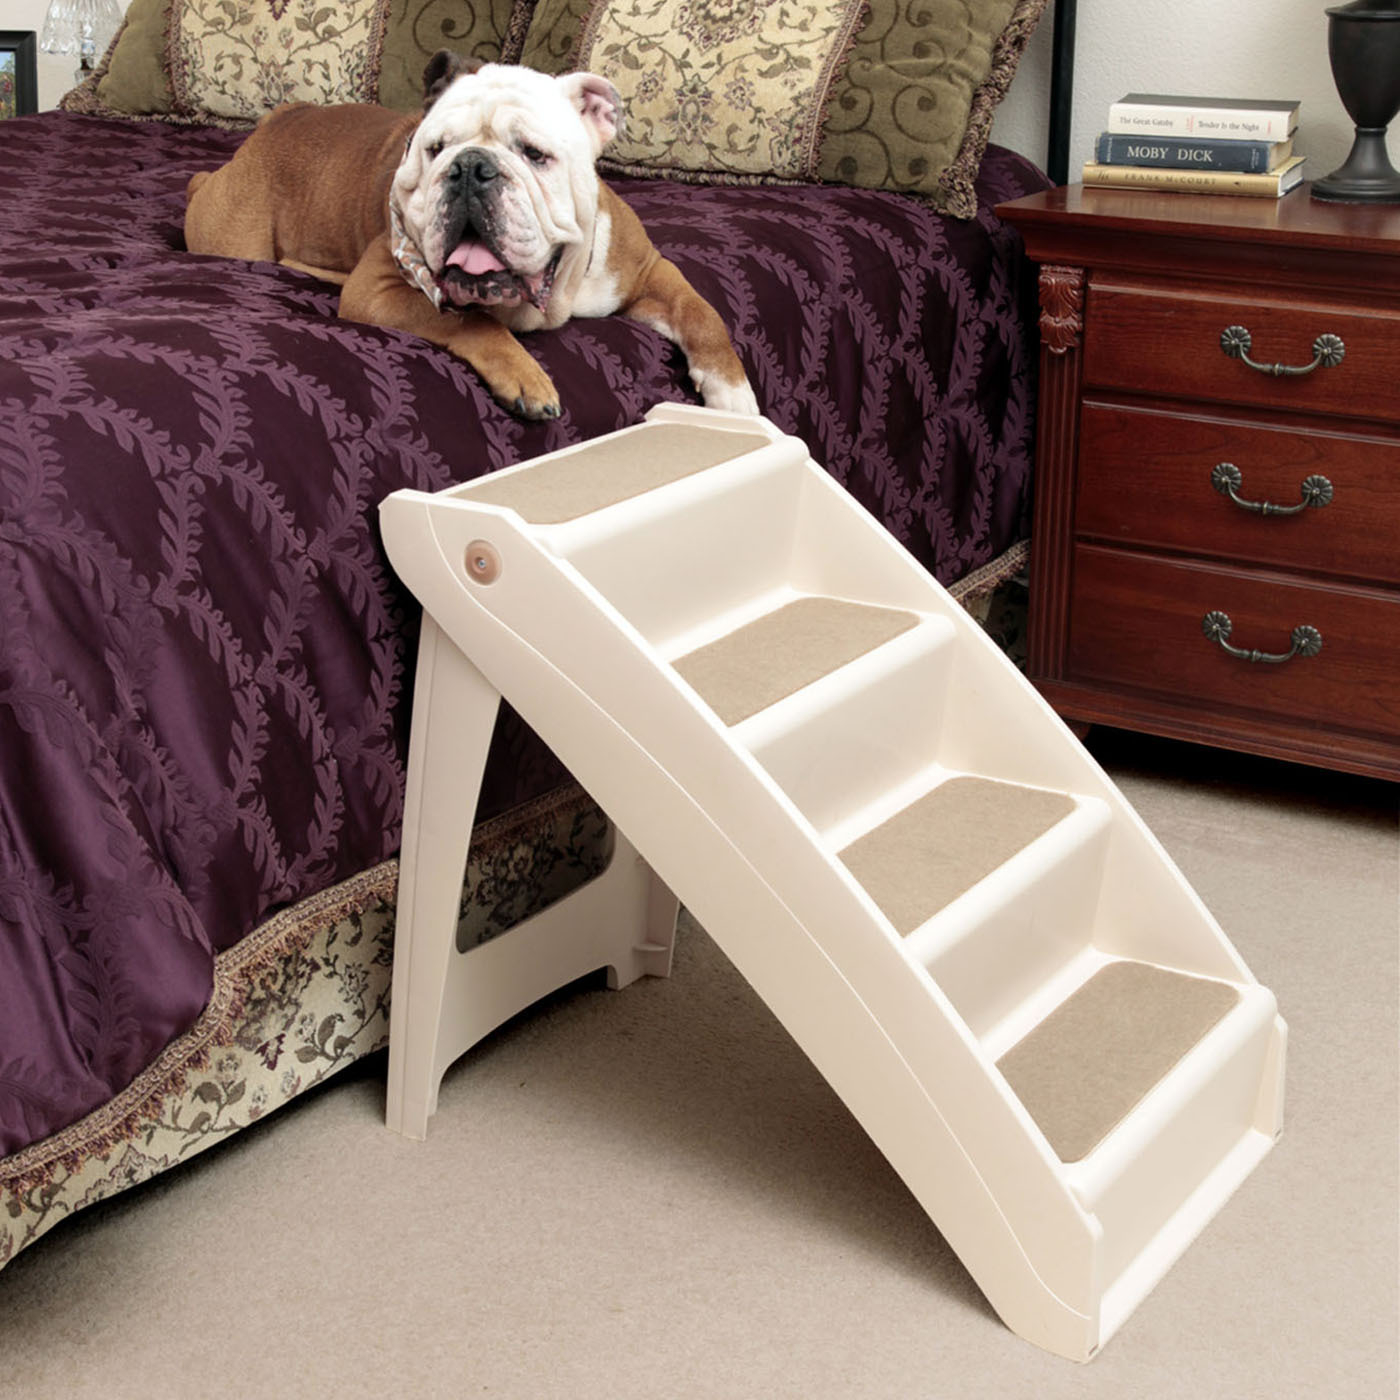 guangtouqiang Dog Stairs Ladder,Breathable and Resilient Dog Stairs,High Density Cotton+Flannel Dog Stairs for High Beds 